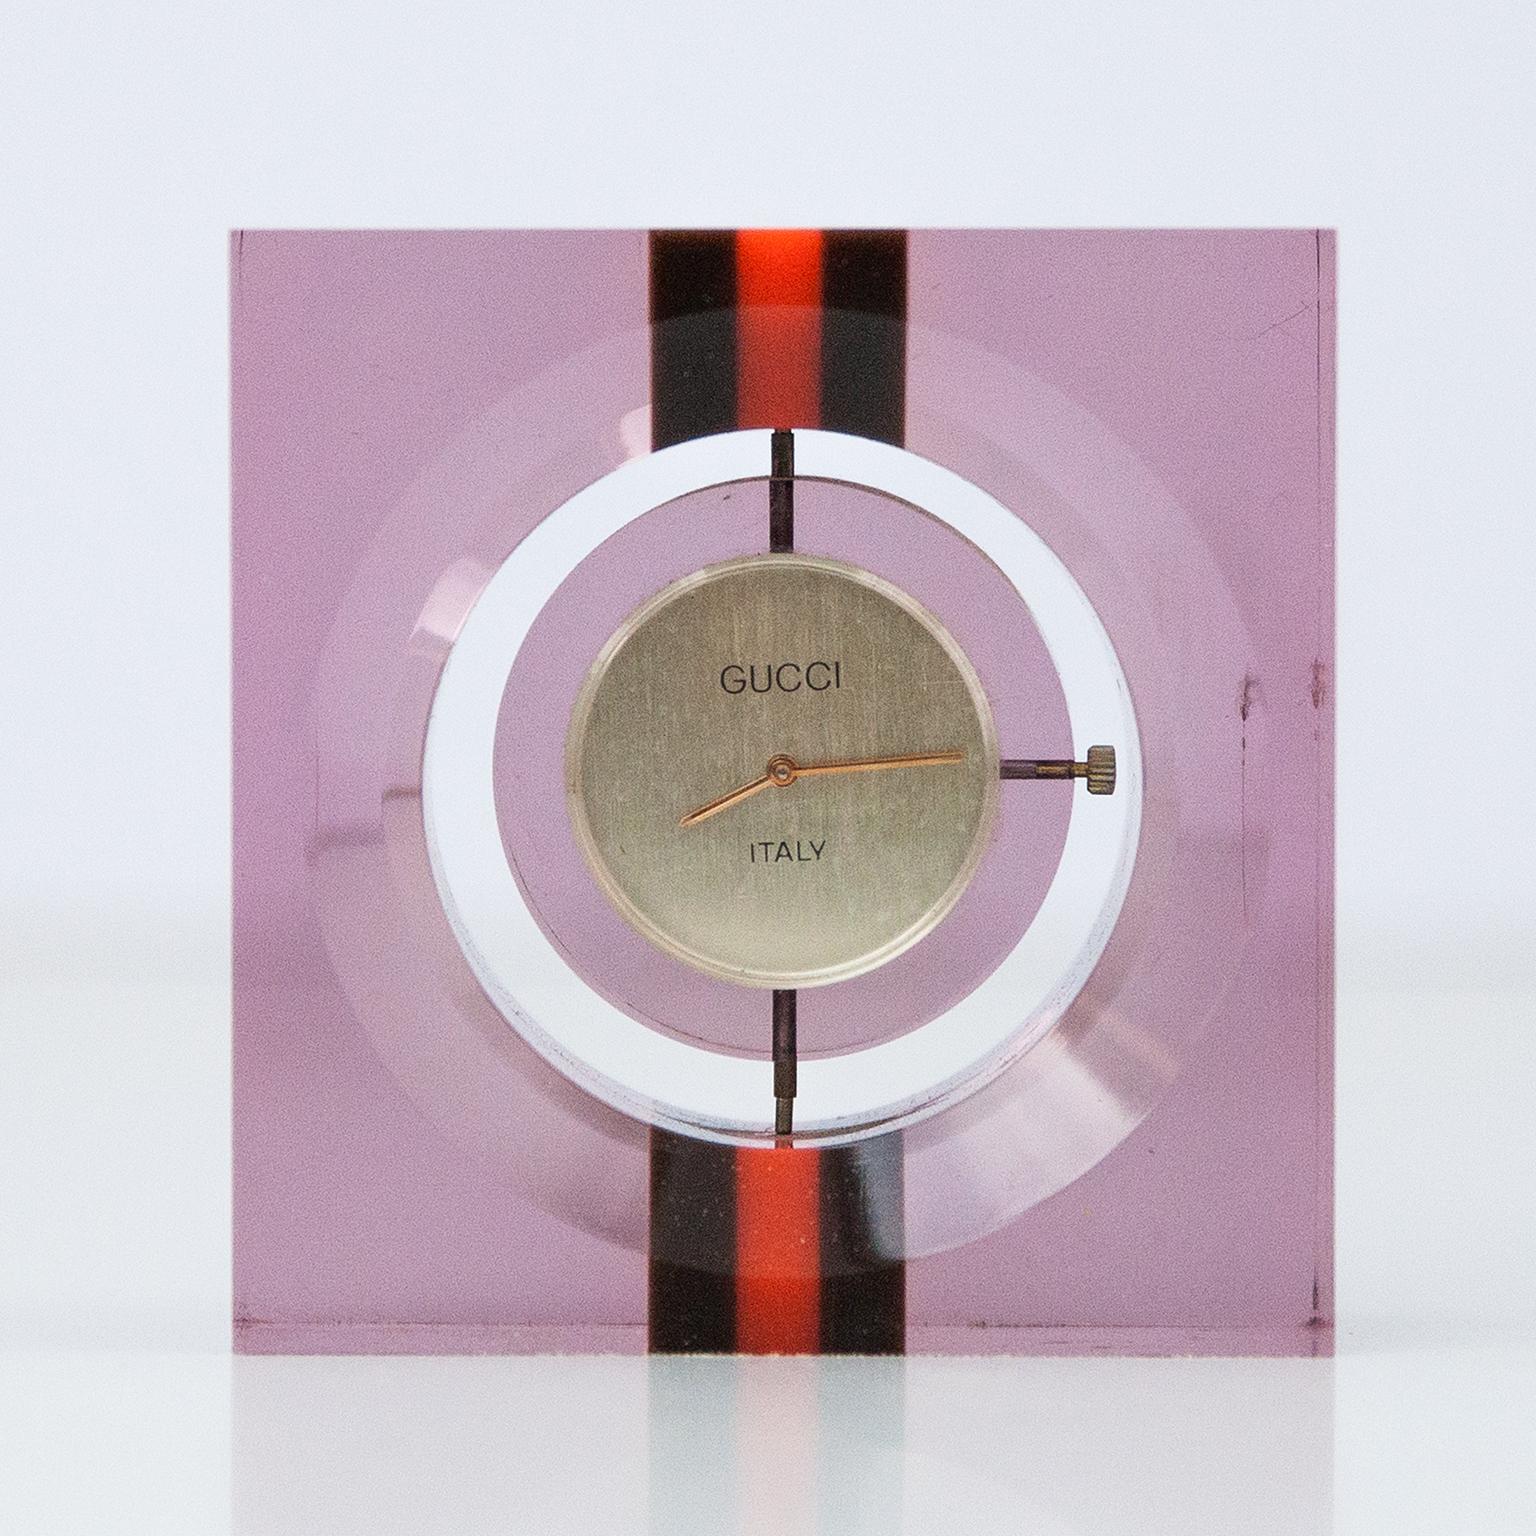 Wonderful little table clock for your desk or nightstand in acrylic in typical Gucci design, signed Gucci Italy.